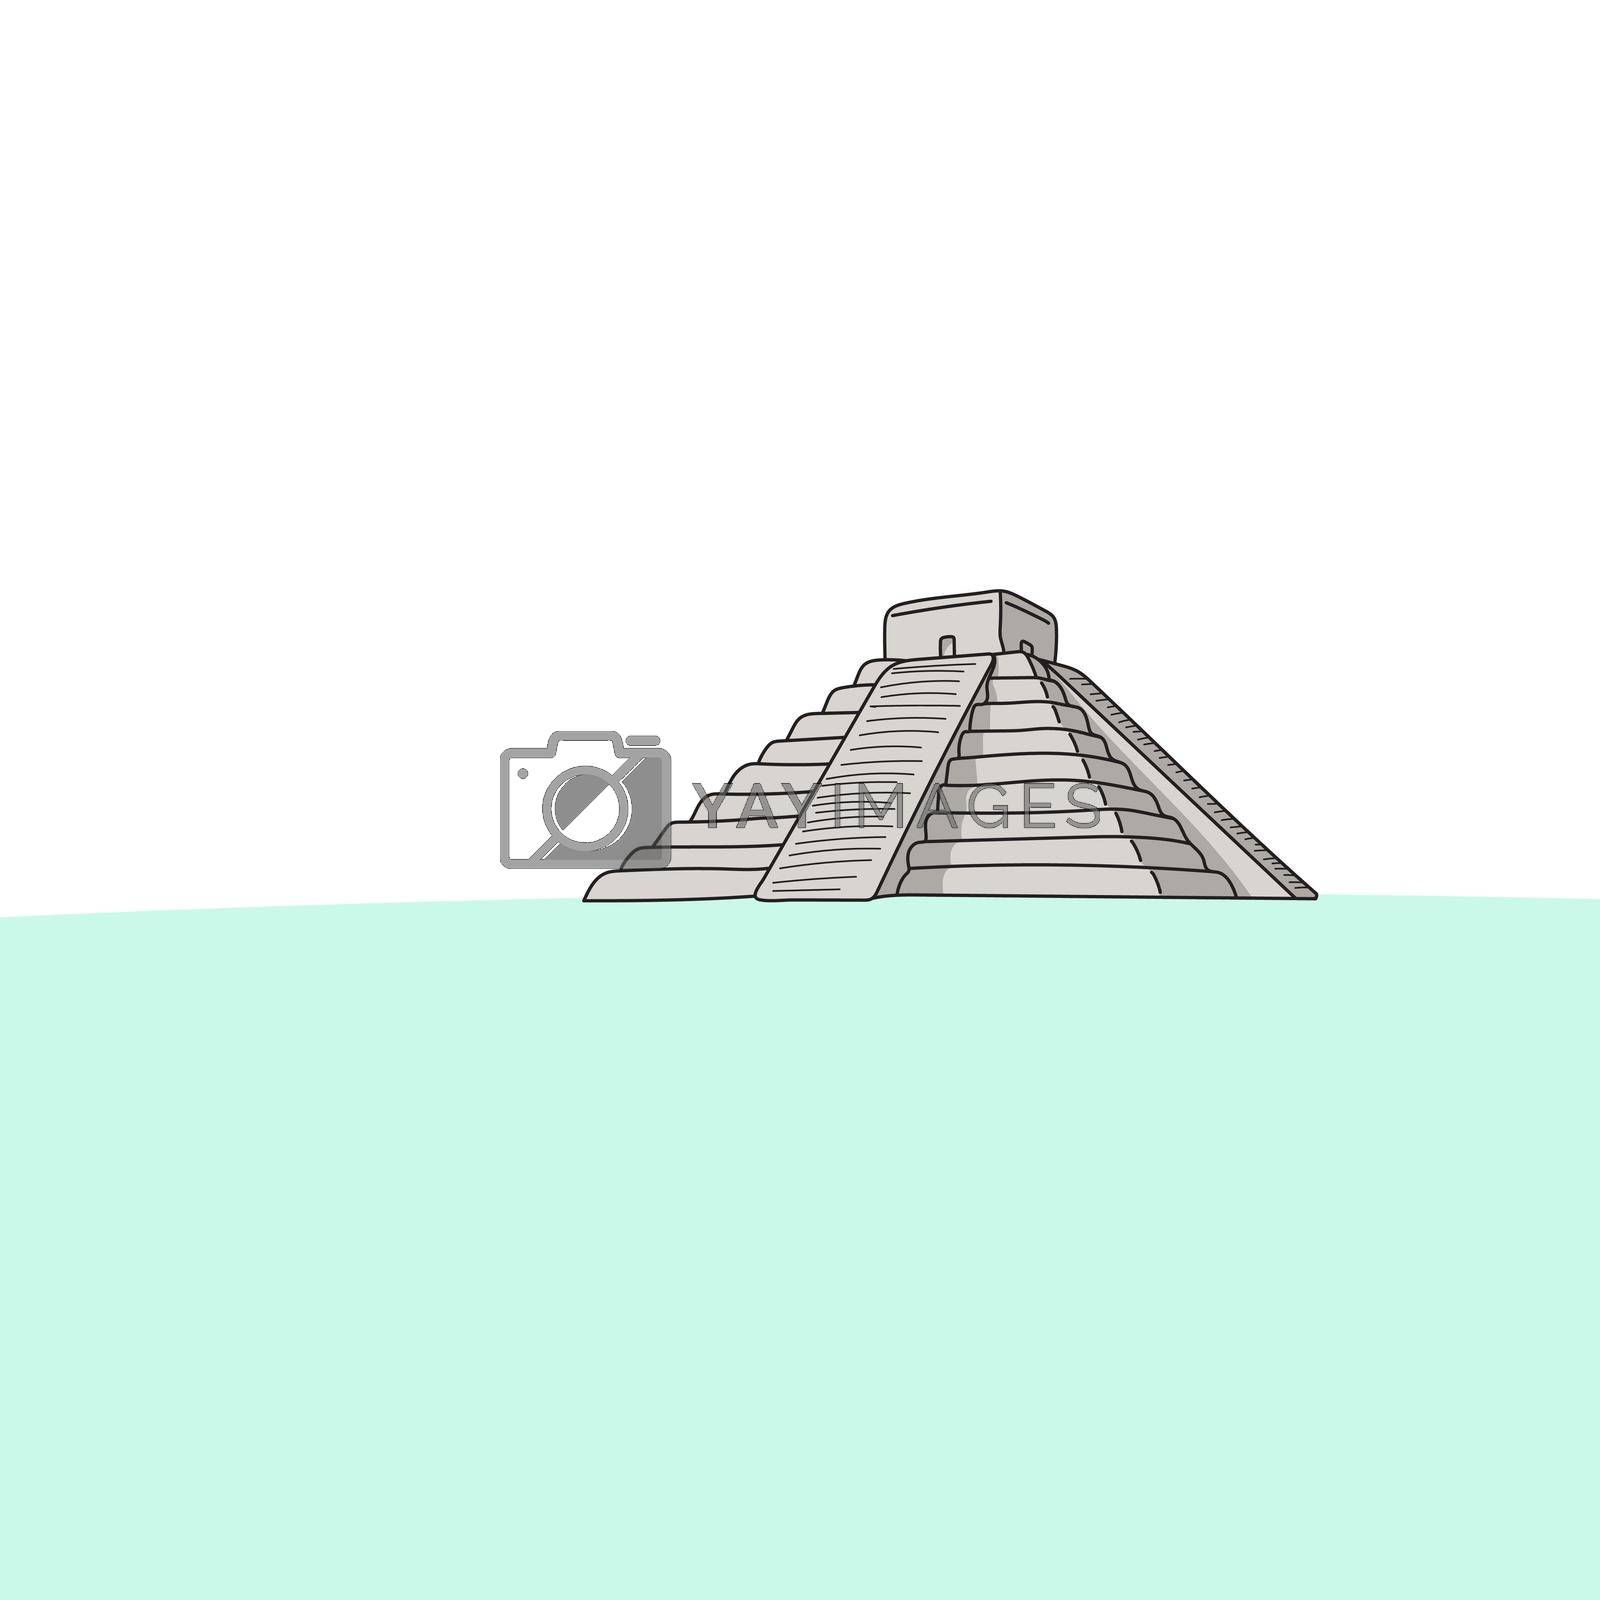 Royalty free image of El Castillo or The Kukulkan Temple of Chichen Itza, mayan pyramid in Yucatan, Mexico vector lllustration hand drawn isolated on white background.  by tidarattj